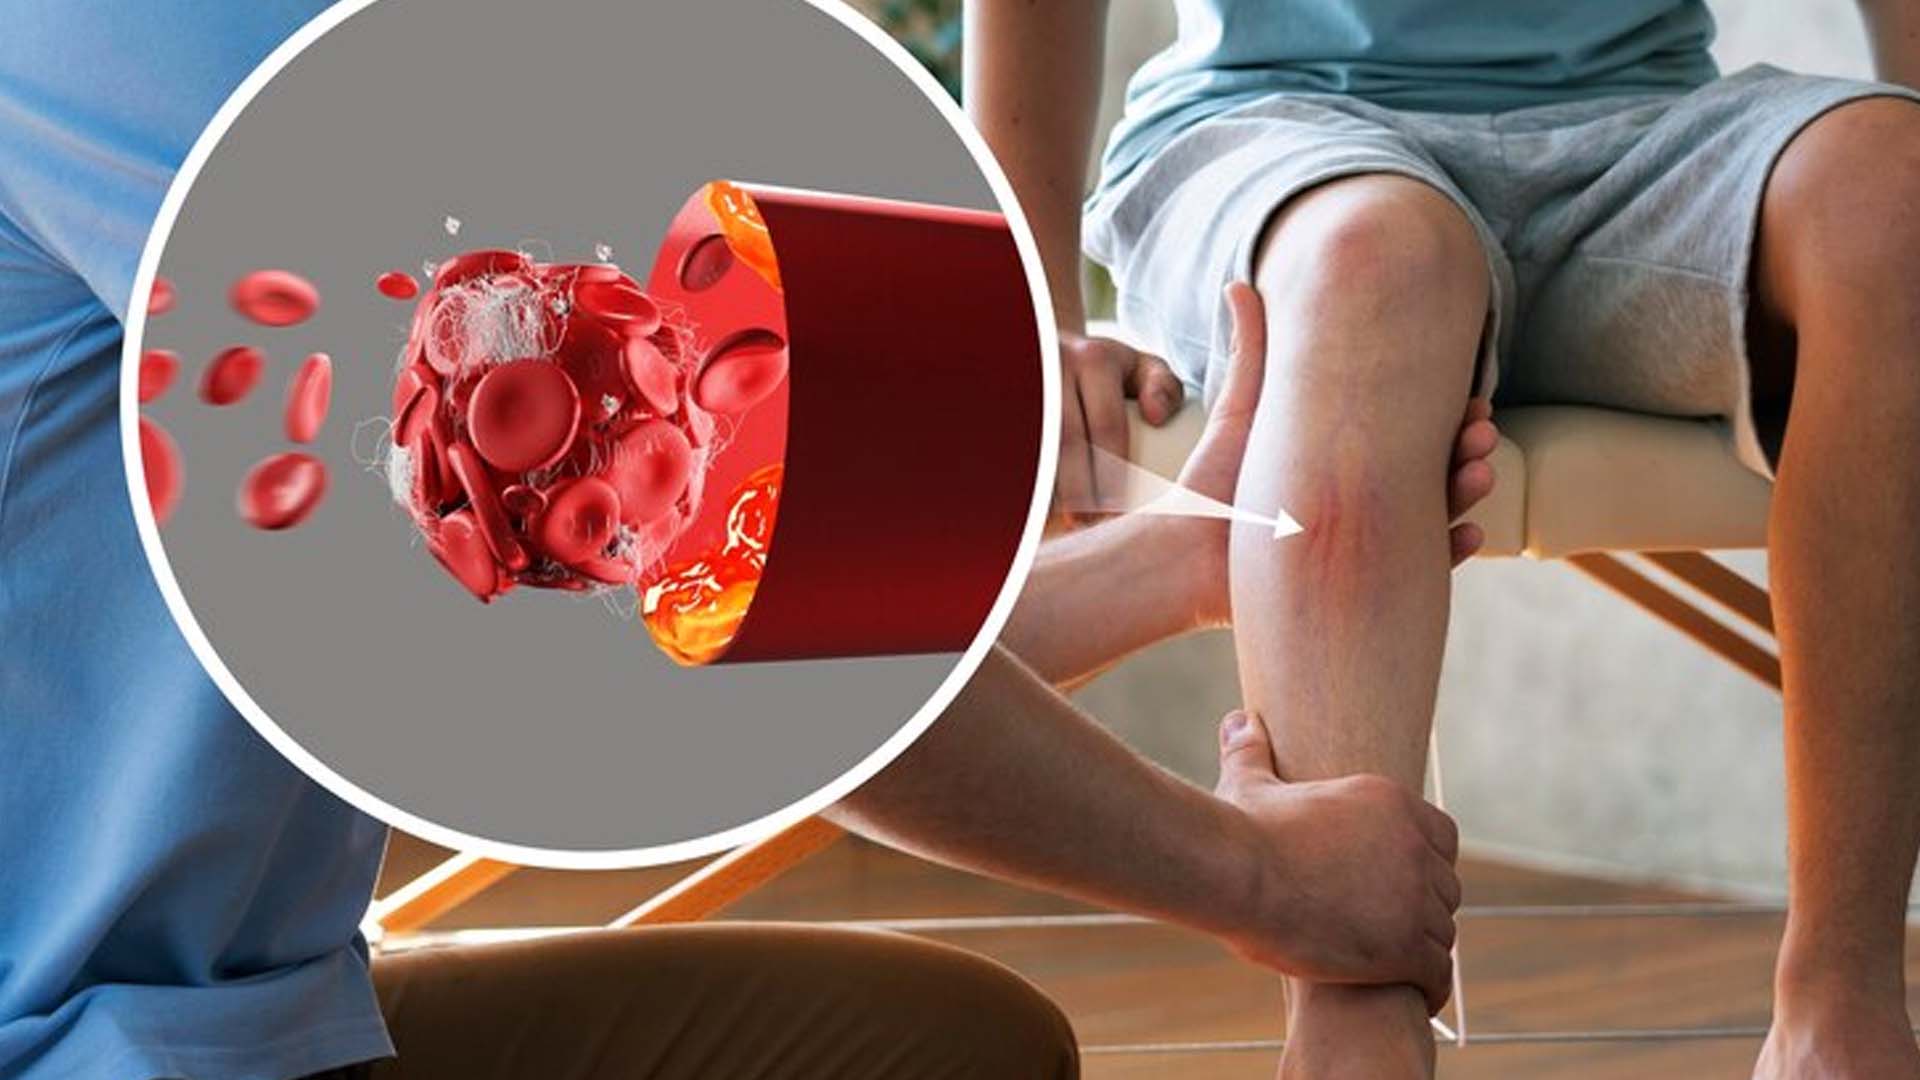 What are the Home Remedies for Deep Vein Thrombosis?